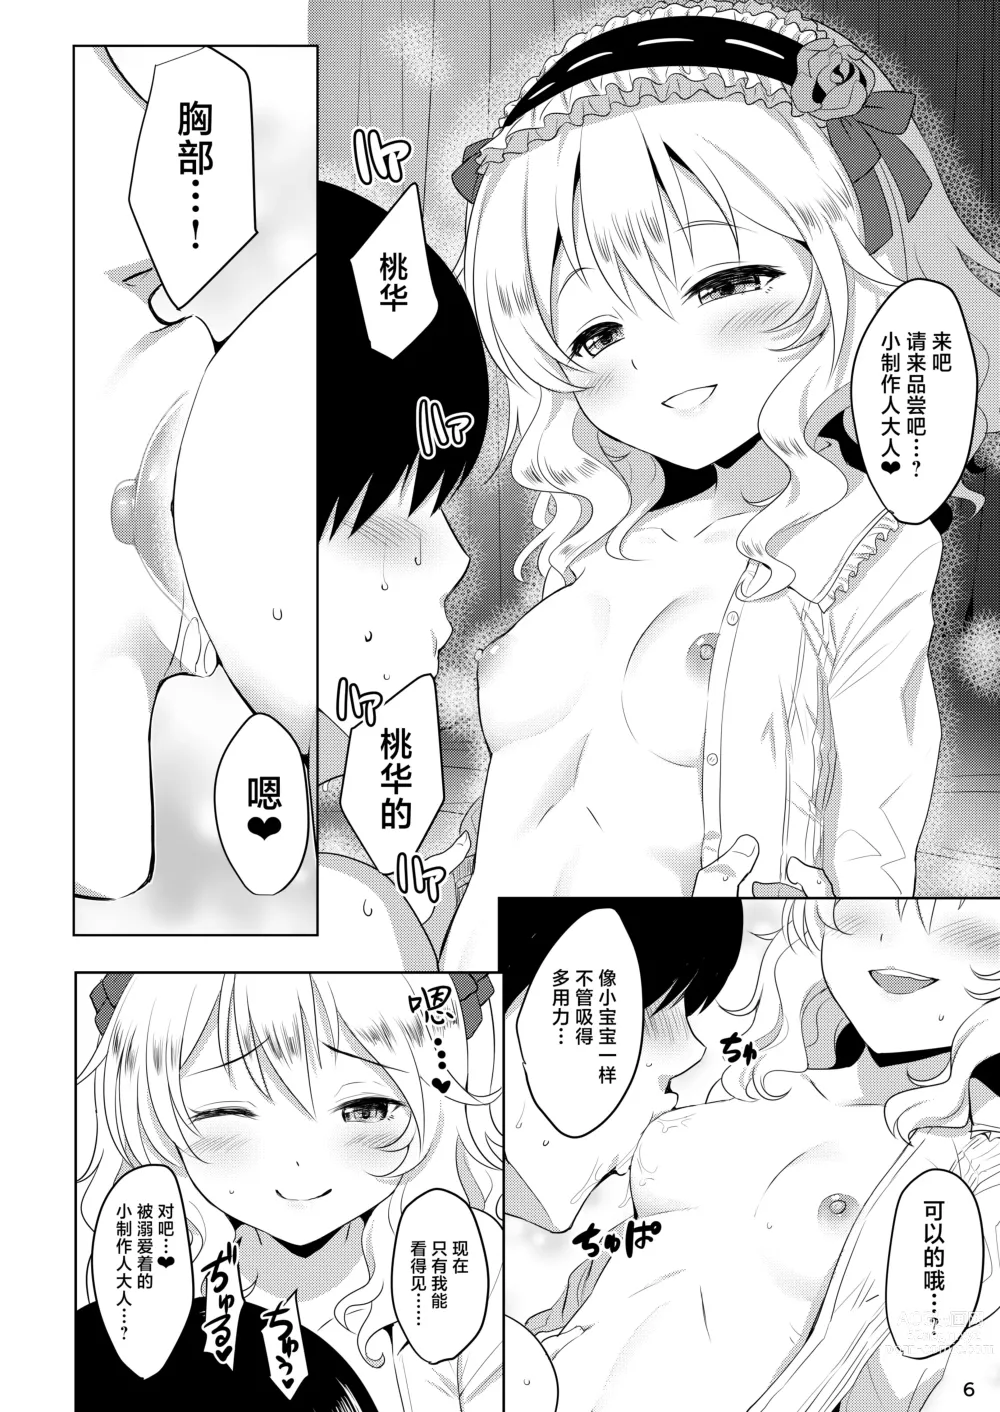 Page 5 of doujinshi CHAMMERs